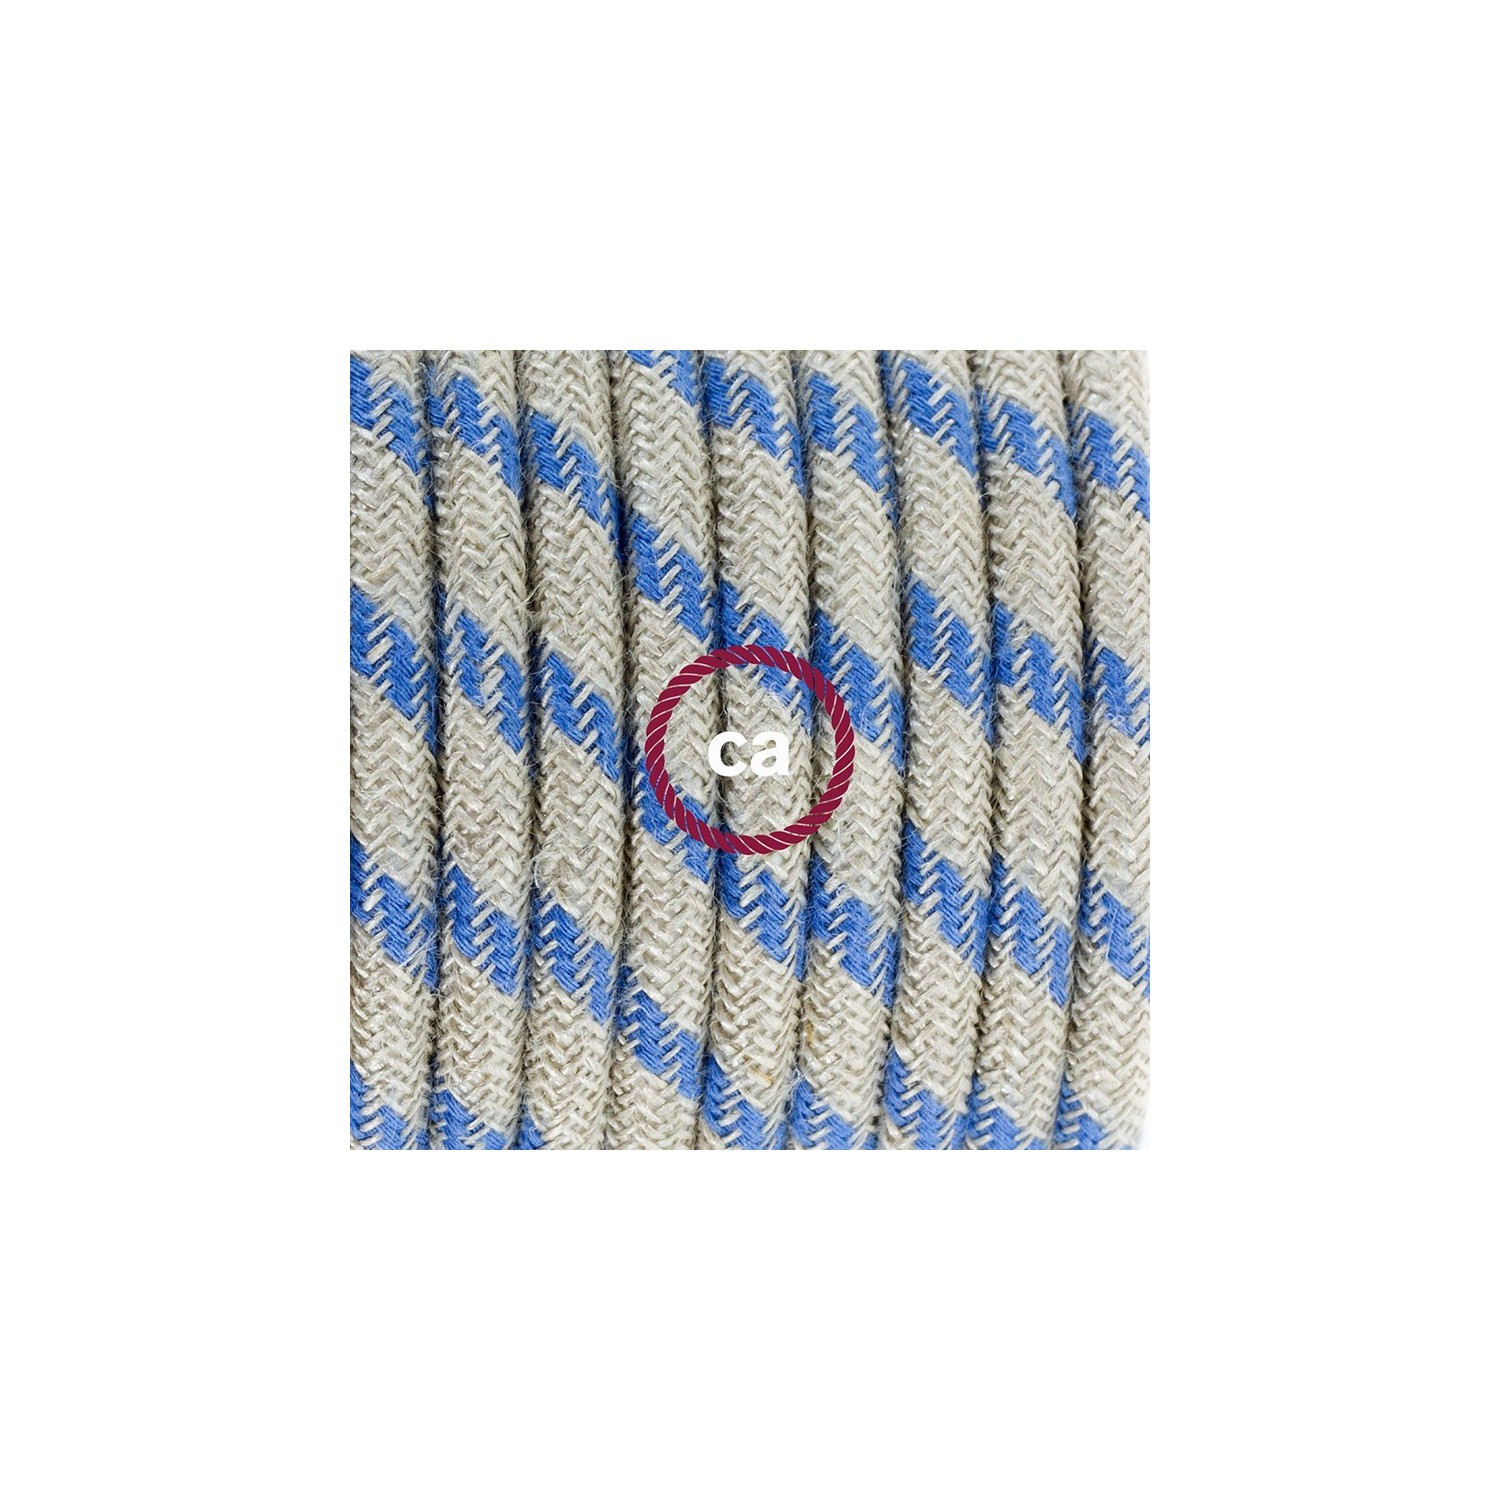 Create your RD55 Stripes Steward Blue Snake and bring the light wherever you want.